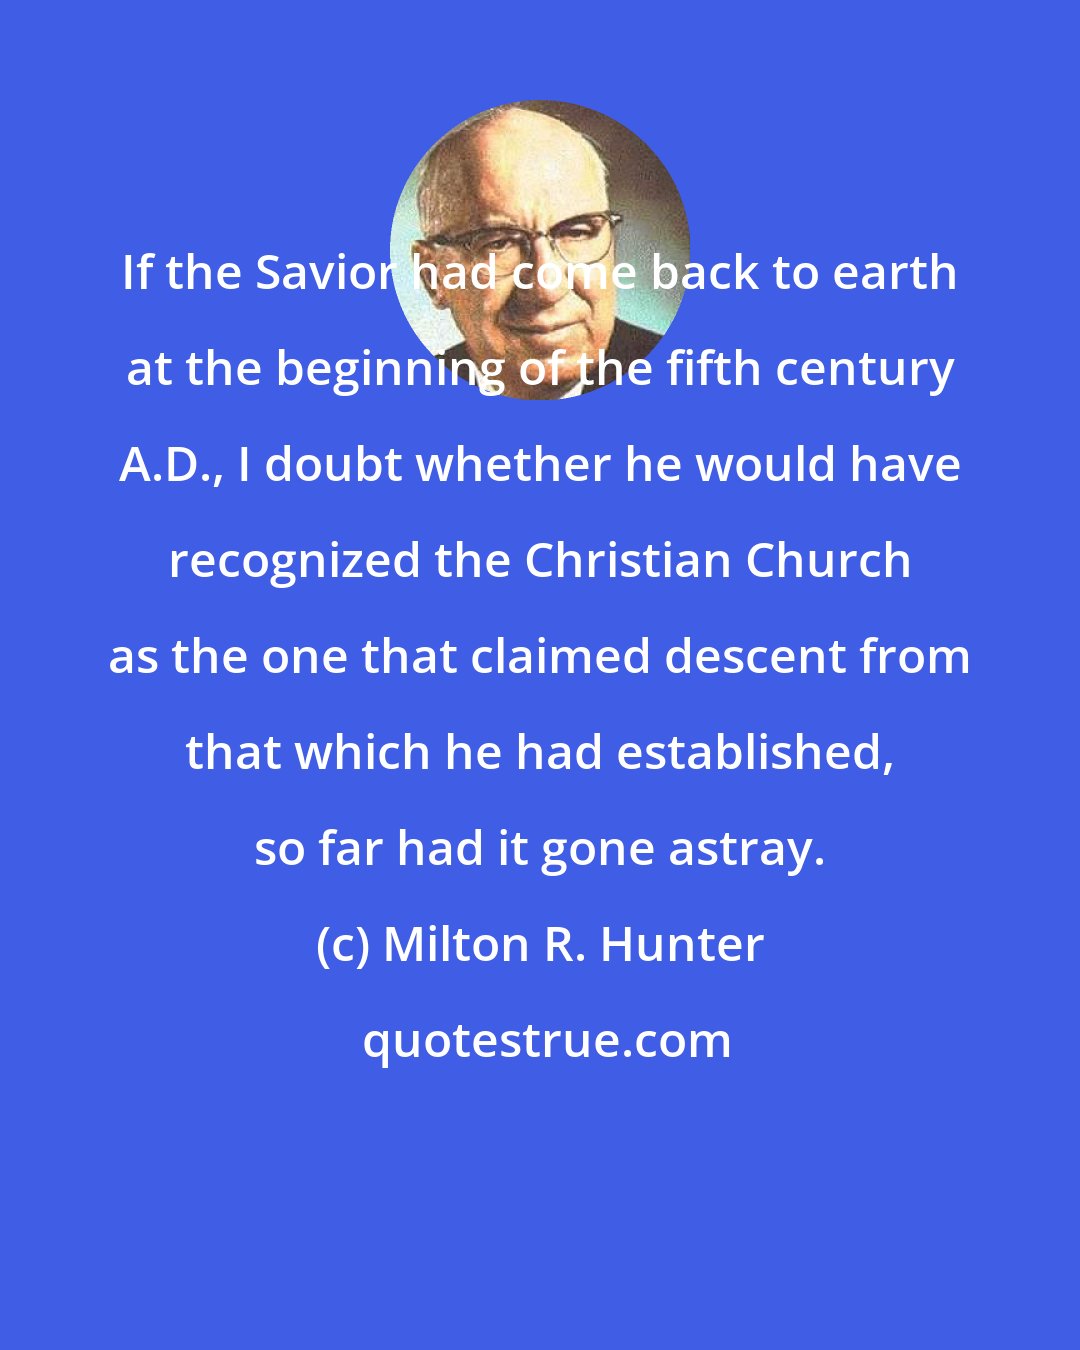 Milton R. Hunter: If the Savior had come back to earth at the beginning of the fifth century A.D., I doubt whether he would have recognized the Christian Church as the one that claimed descent from that which he had established, so far had it gone astray.